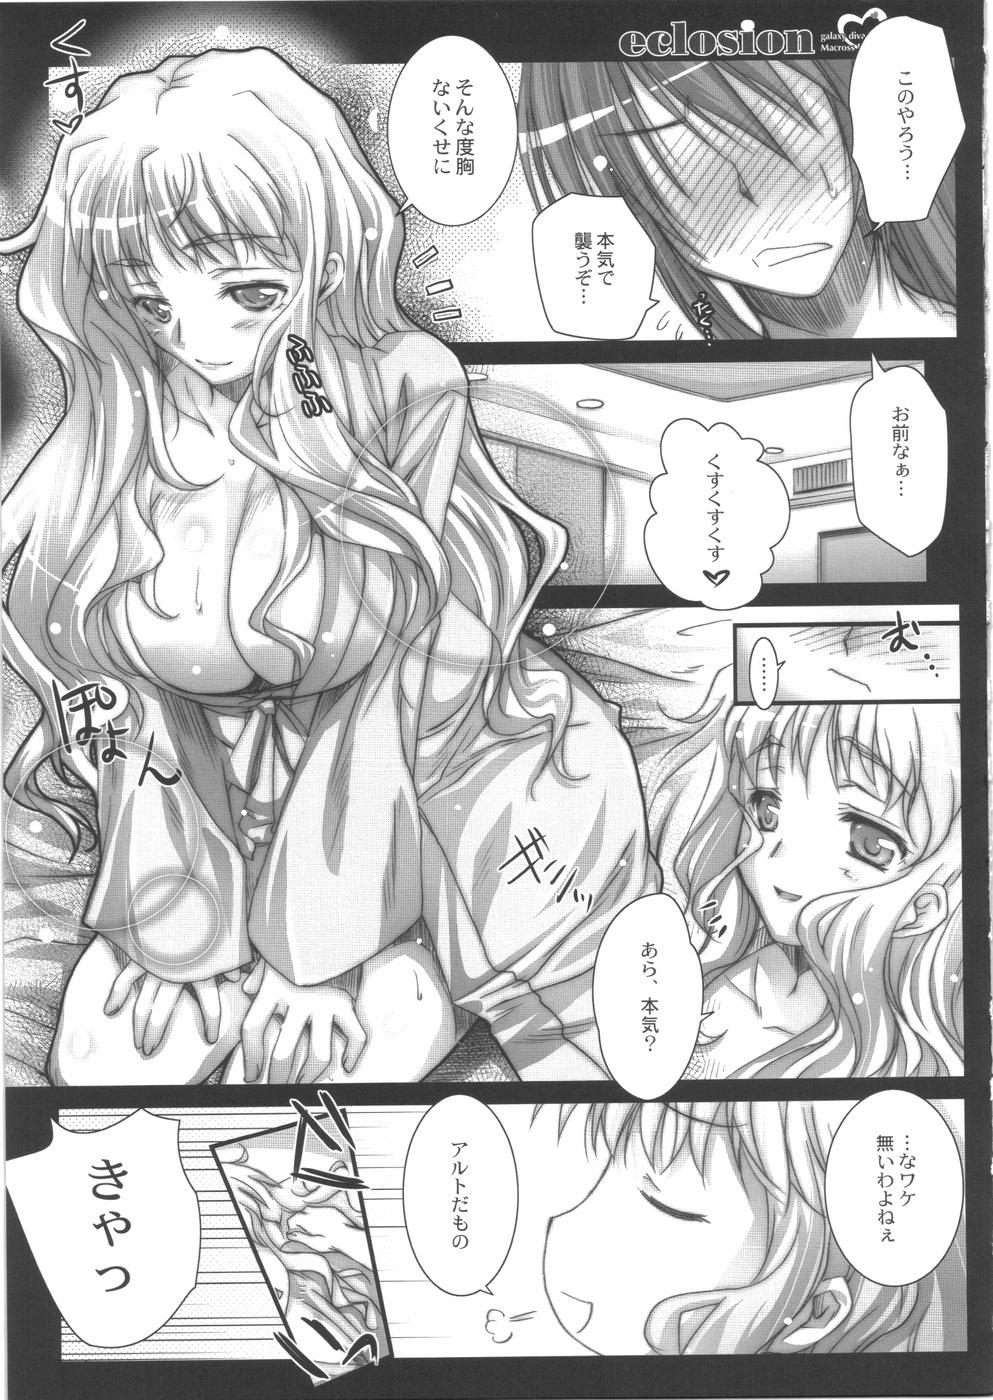 Domina eclosion - Macross frontier Lovers - Page 9